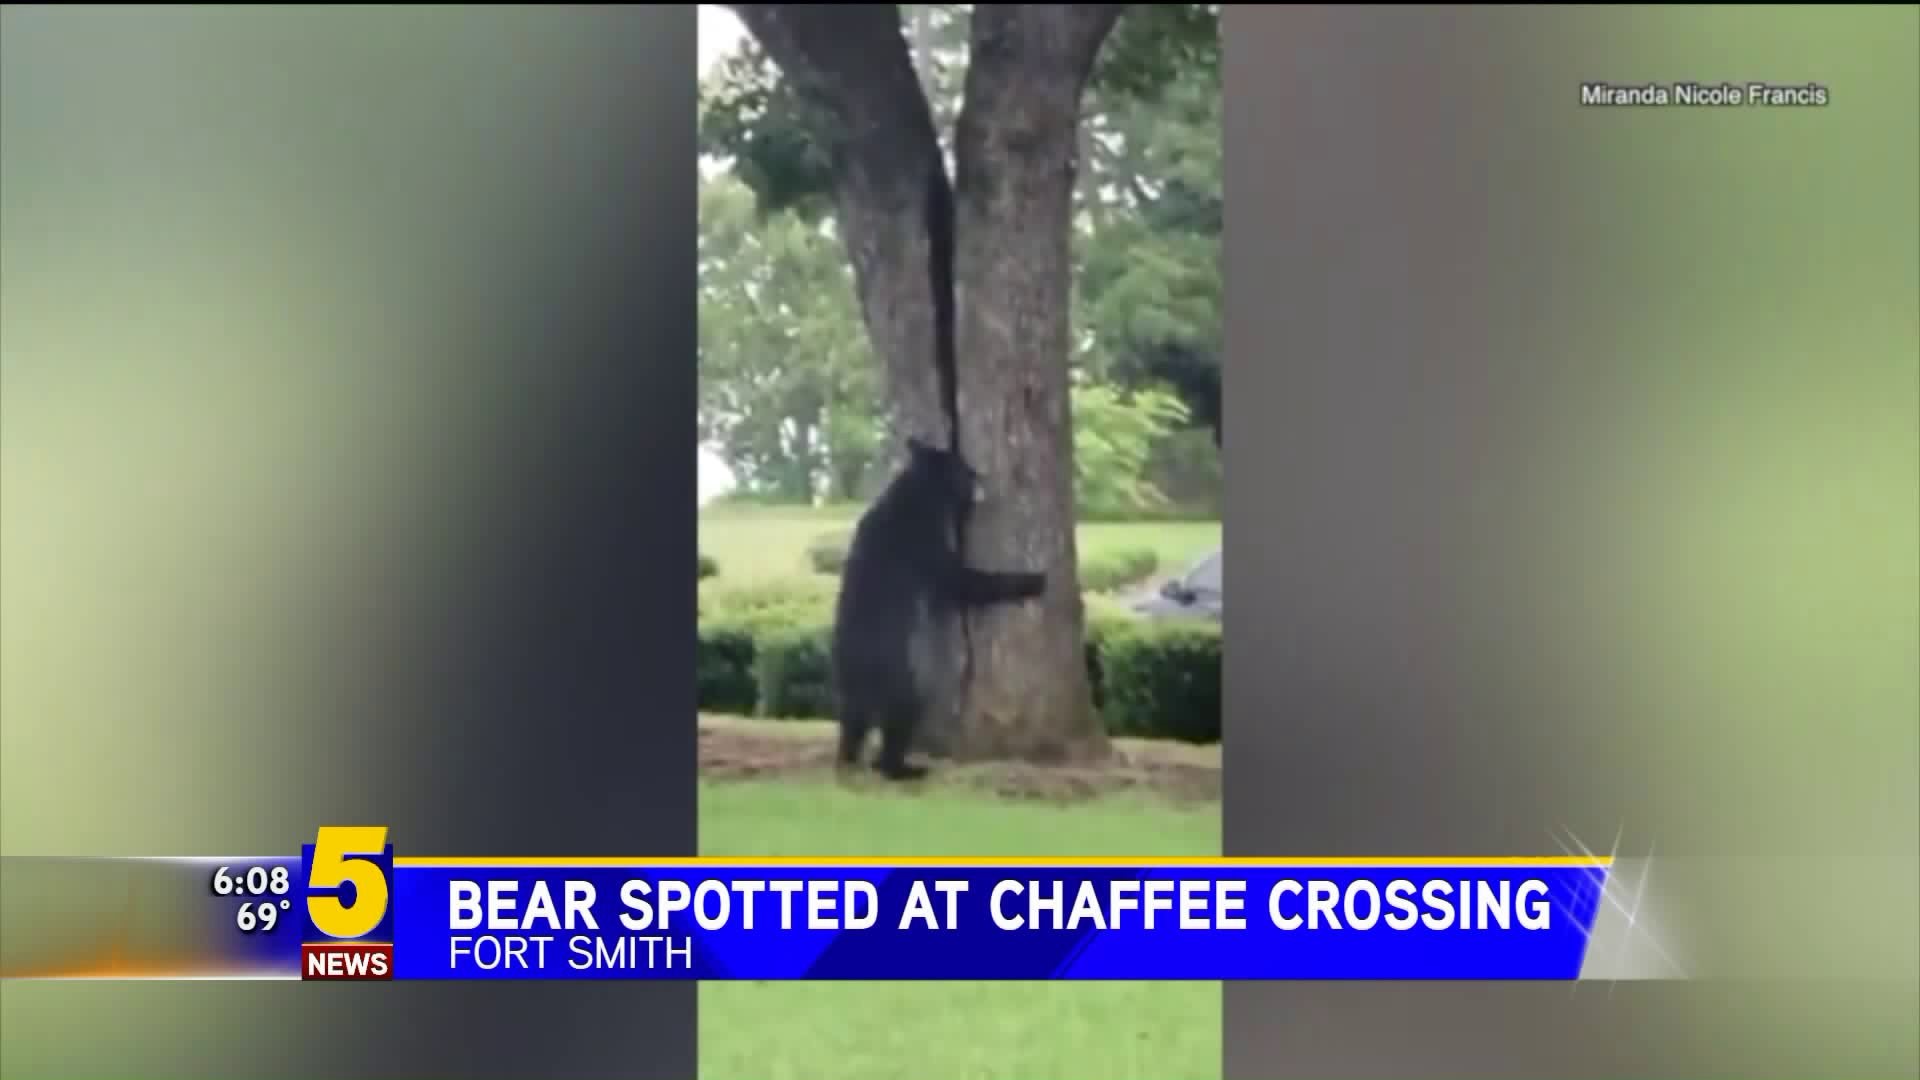 Bear Spotted at Chaffee Crossing